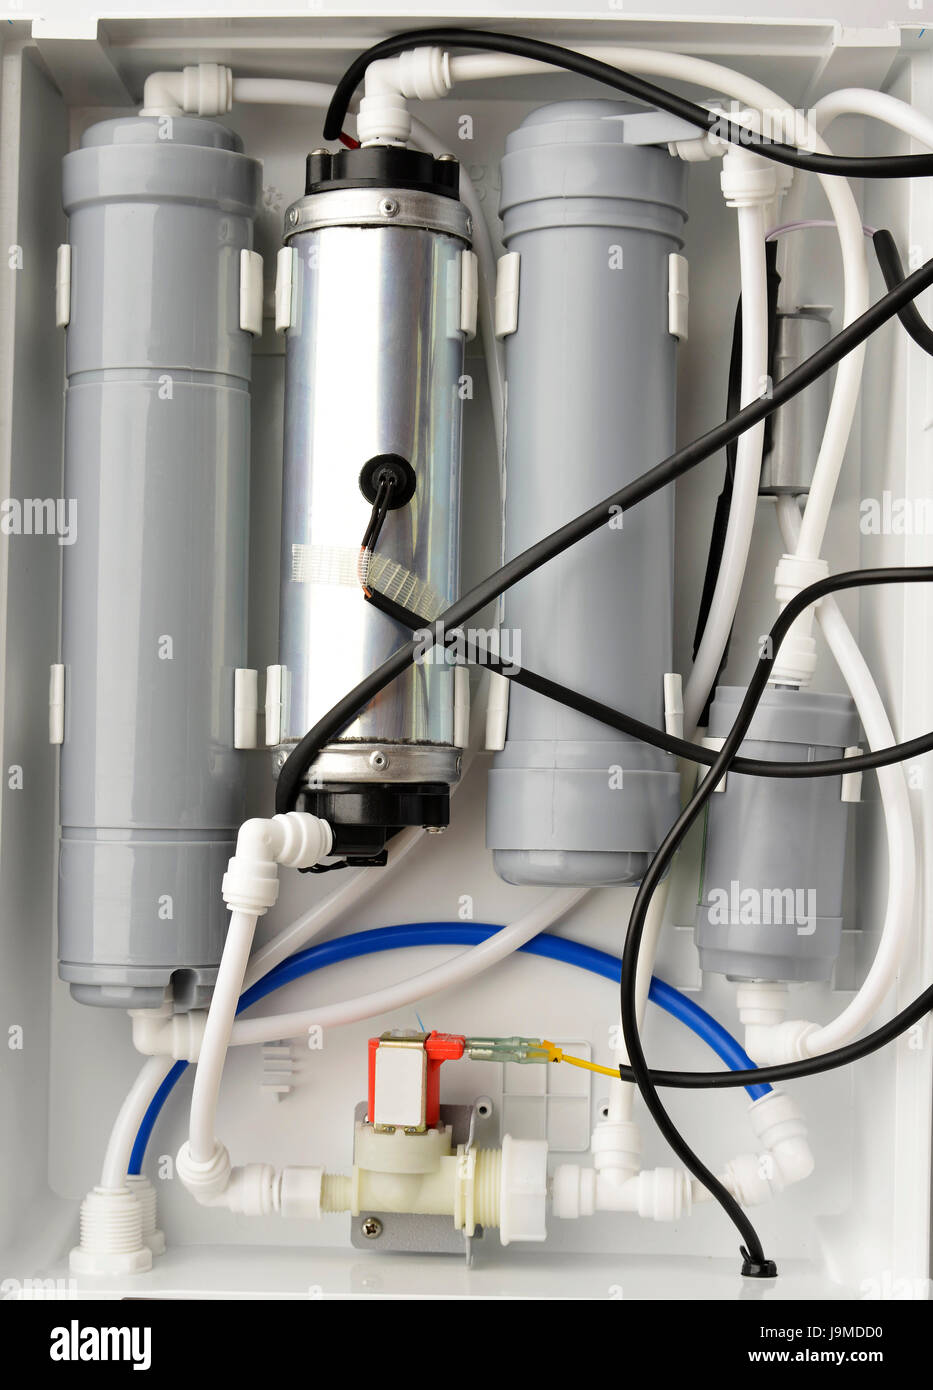 Top View of Water Purification Filter System Stock Photo